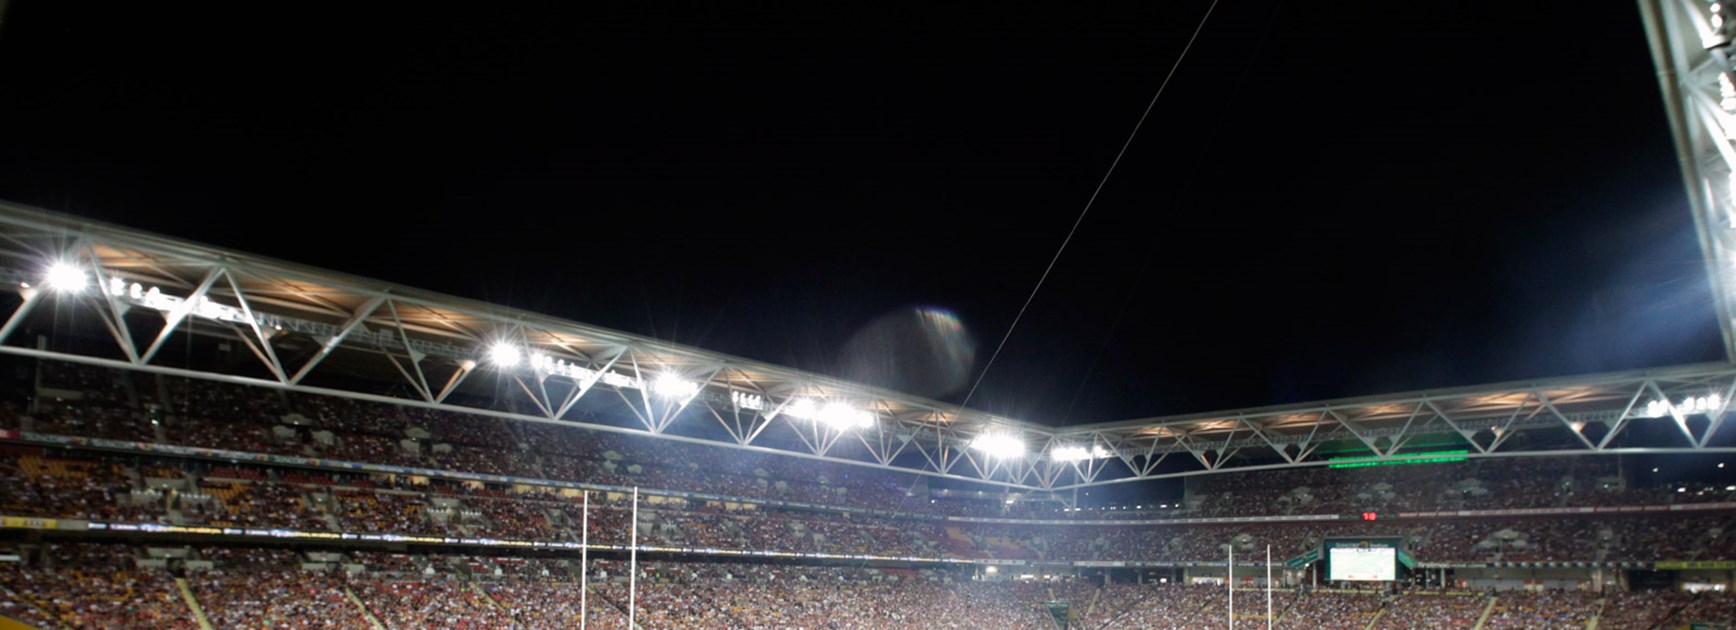 Several NRL stars have named Suncorp Stadium as their favourite away venue.